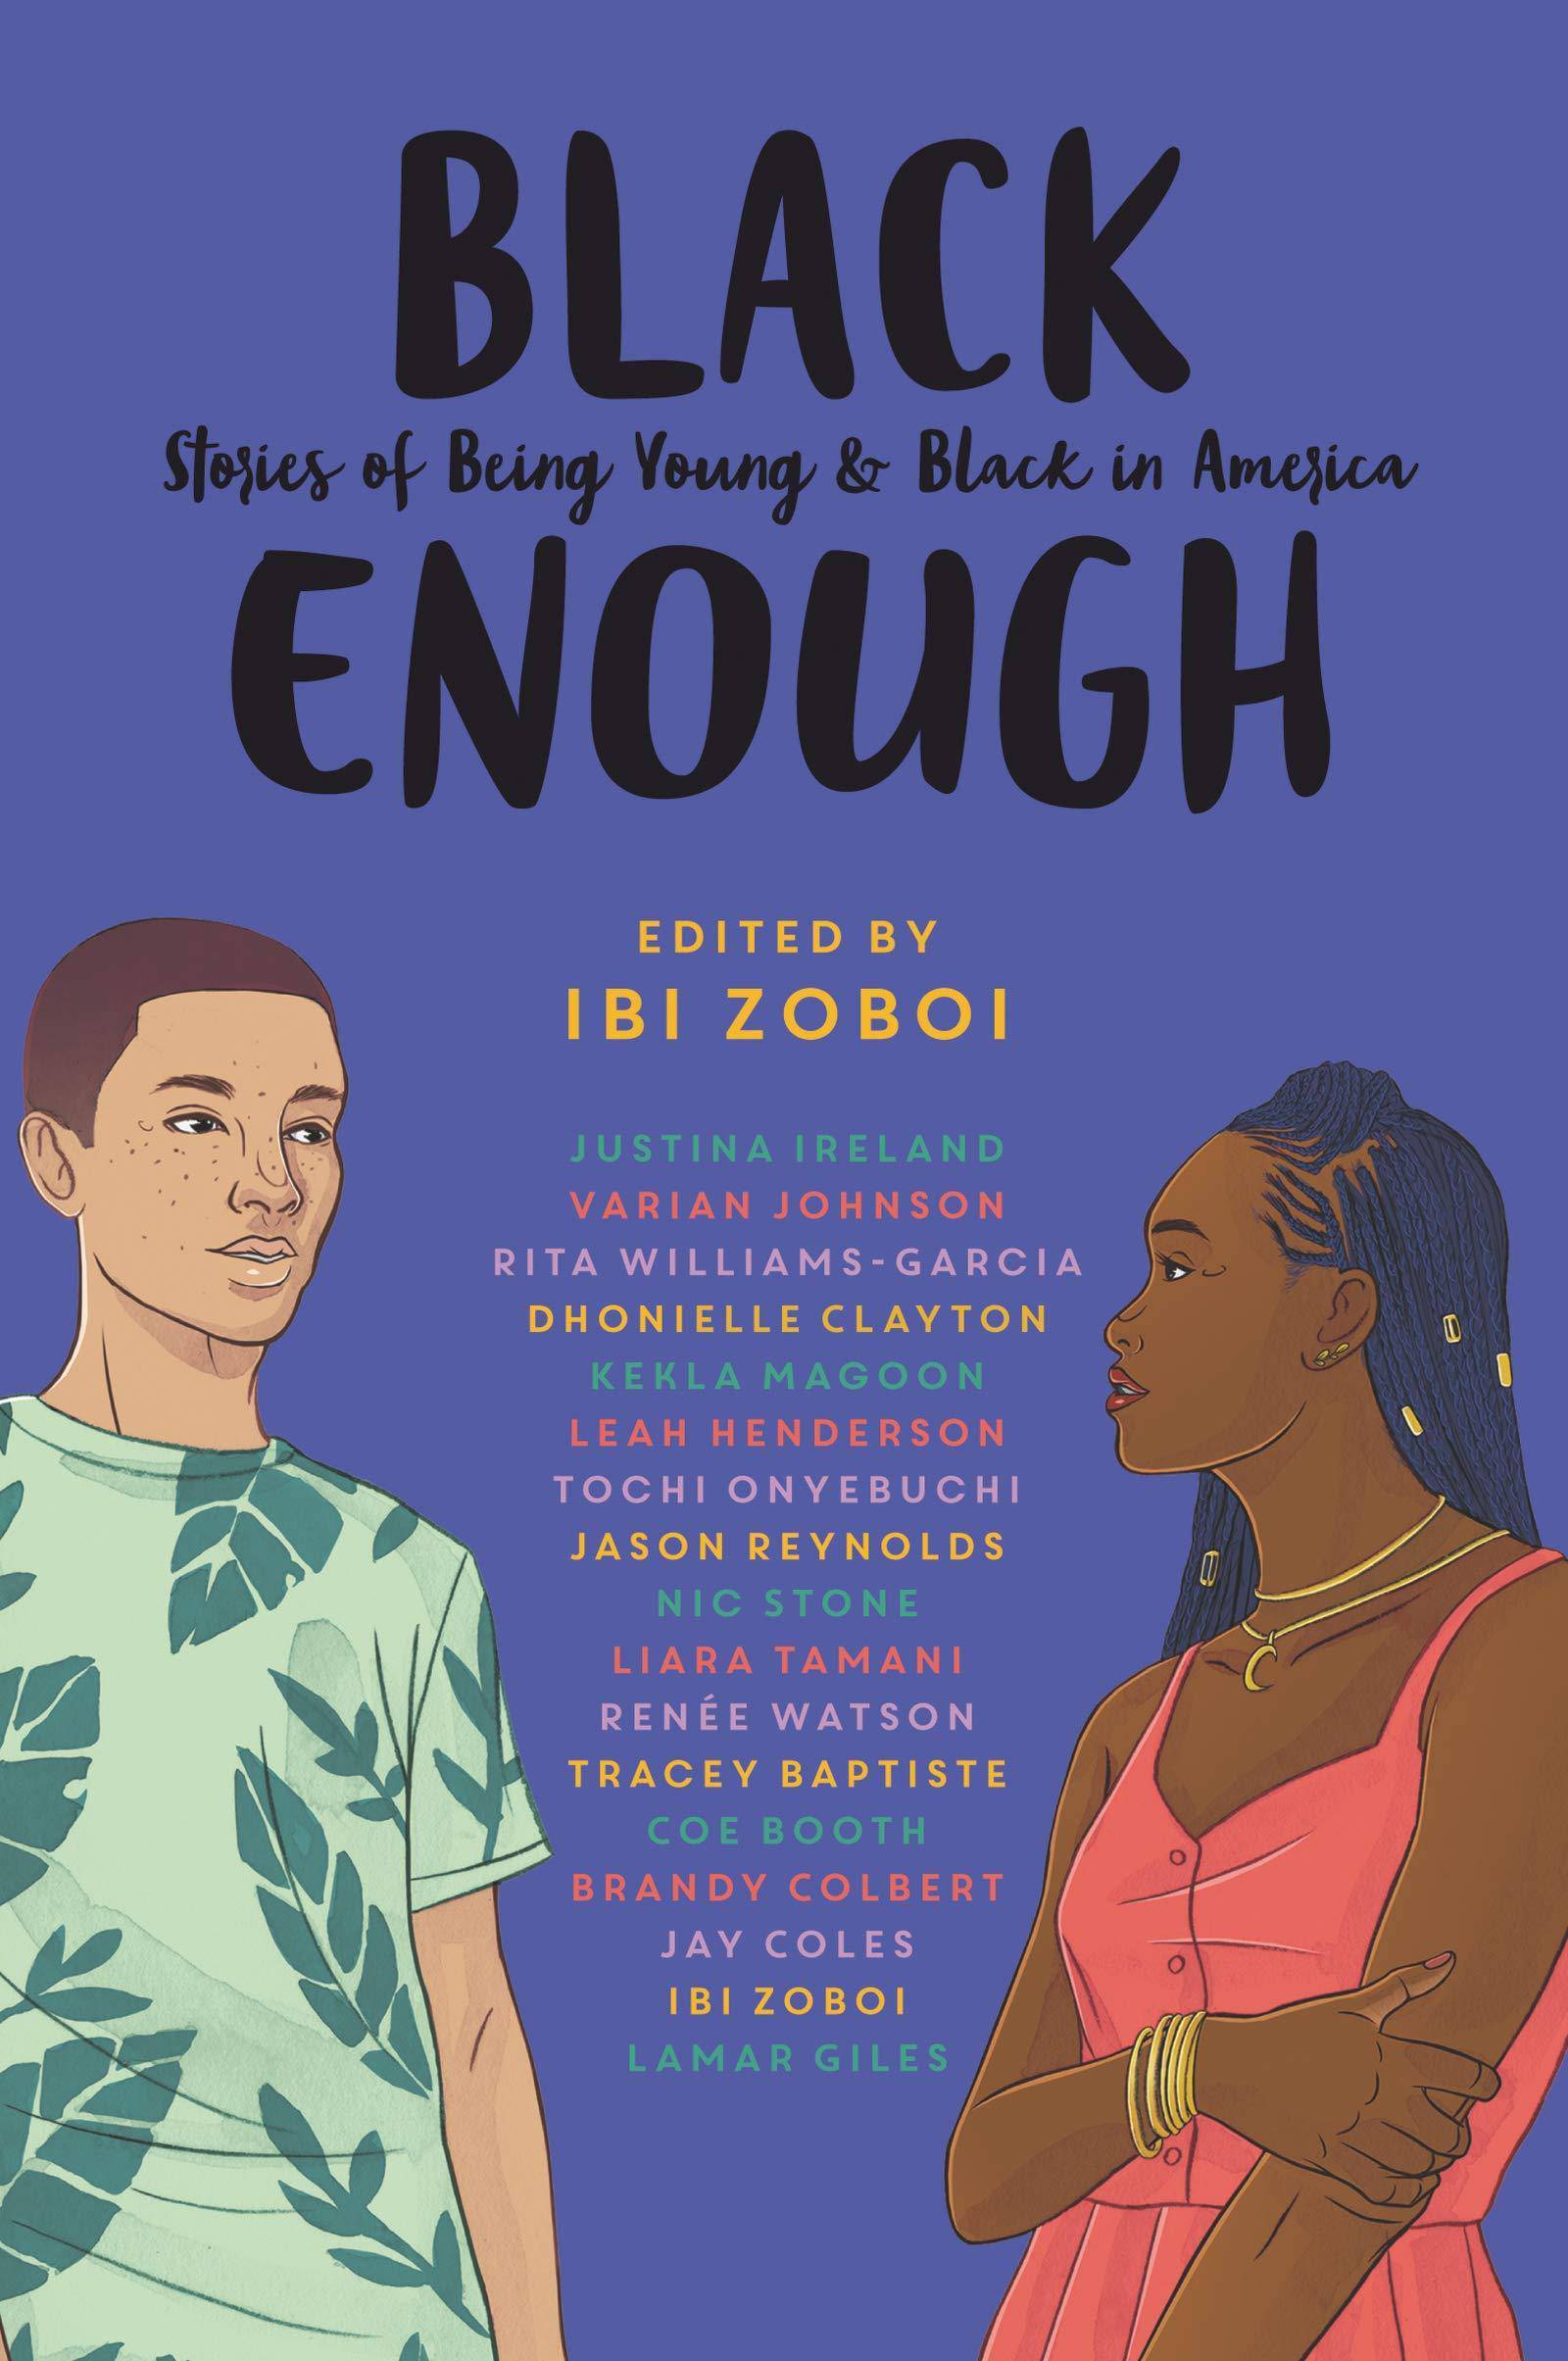 Black Enough: Stories of Being Young & Black in America - SureShot Books Publishing LLC